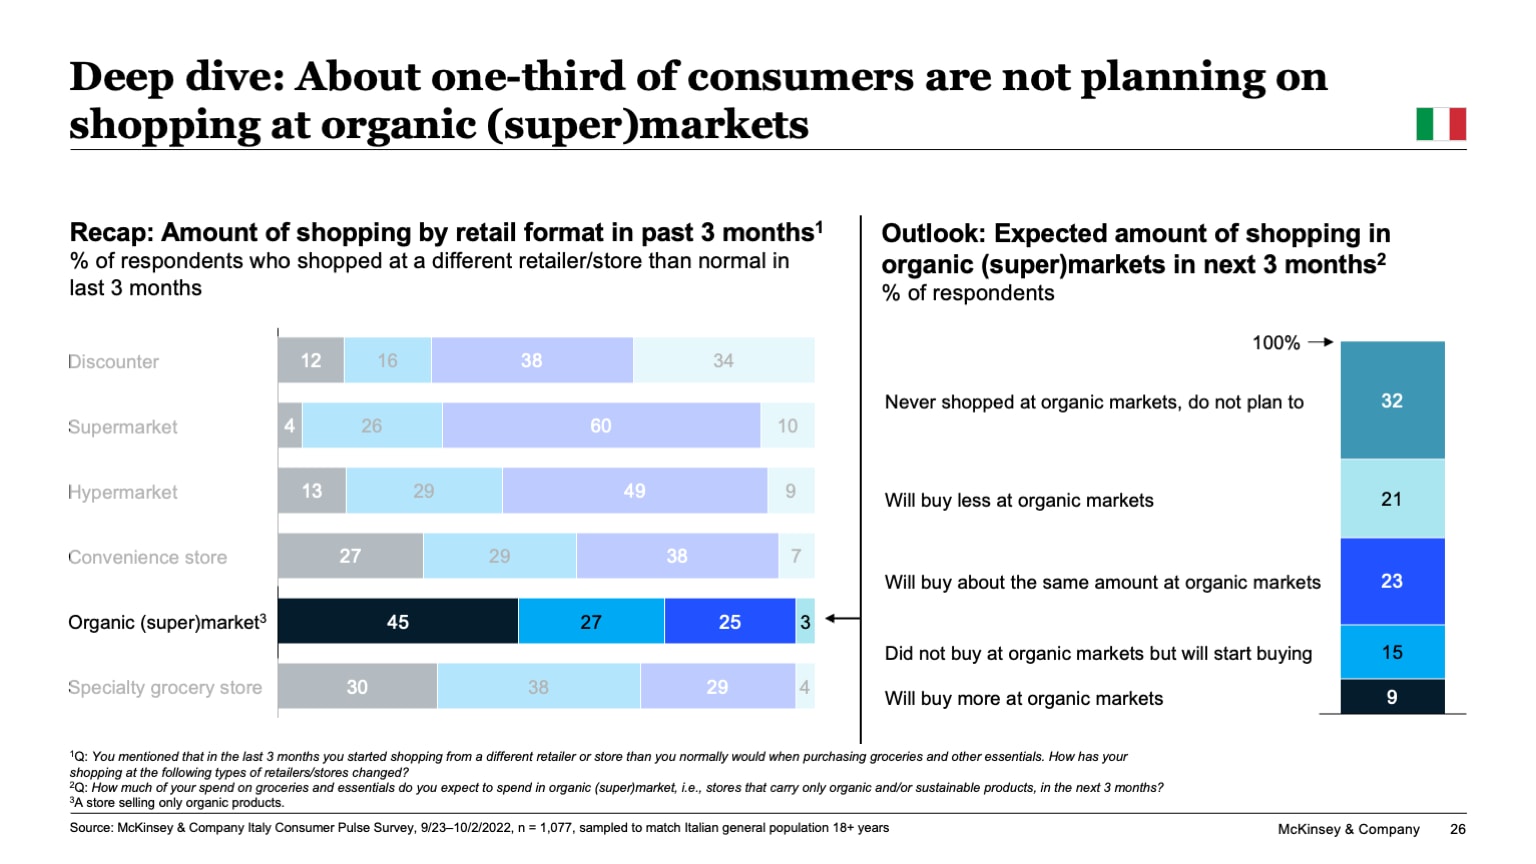 Deep dive: About one-third of consumers are not planning on shopping at organic (super)markets